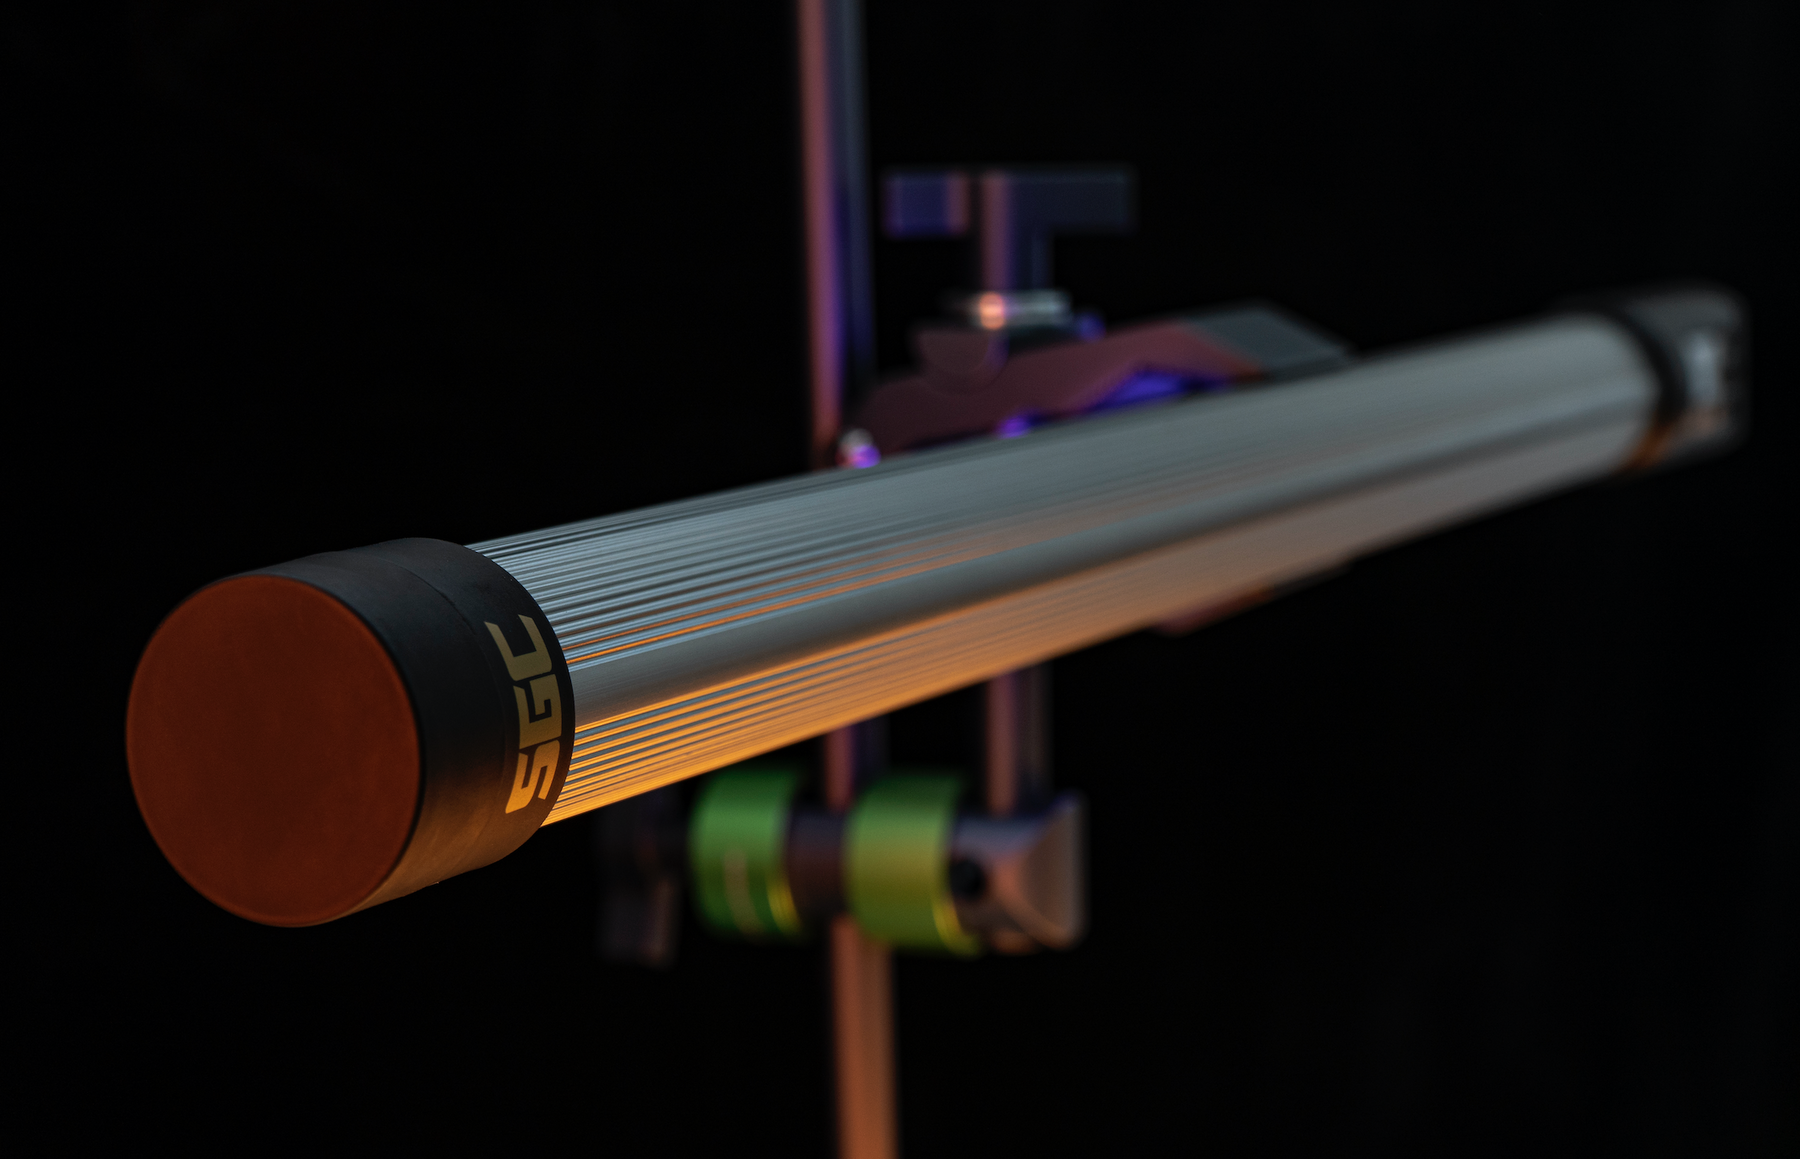 Prism Special Edition (SE) - The Ultimate LED Tube for Content Creators